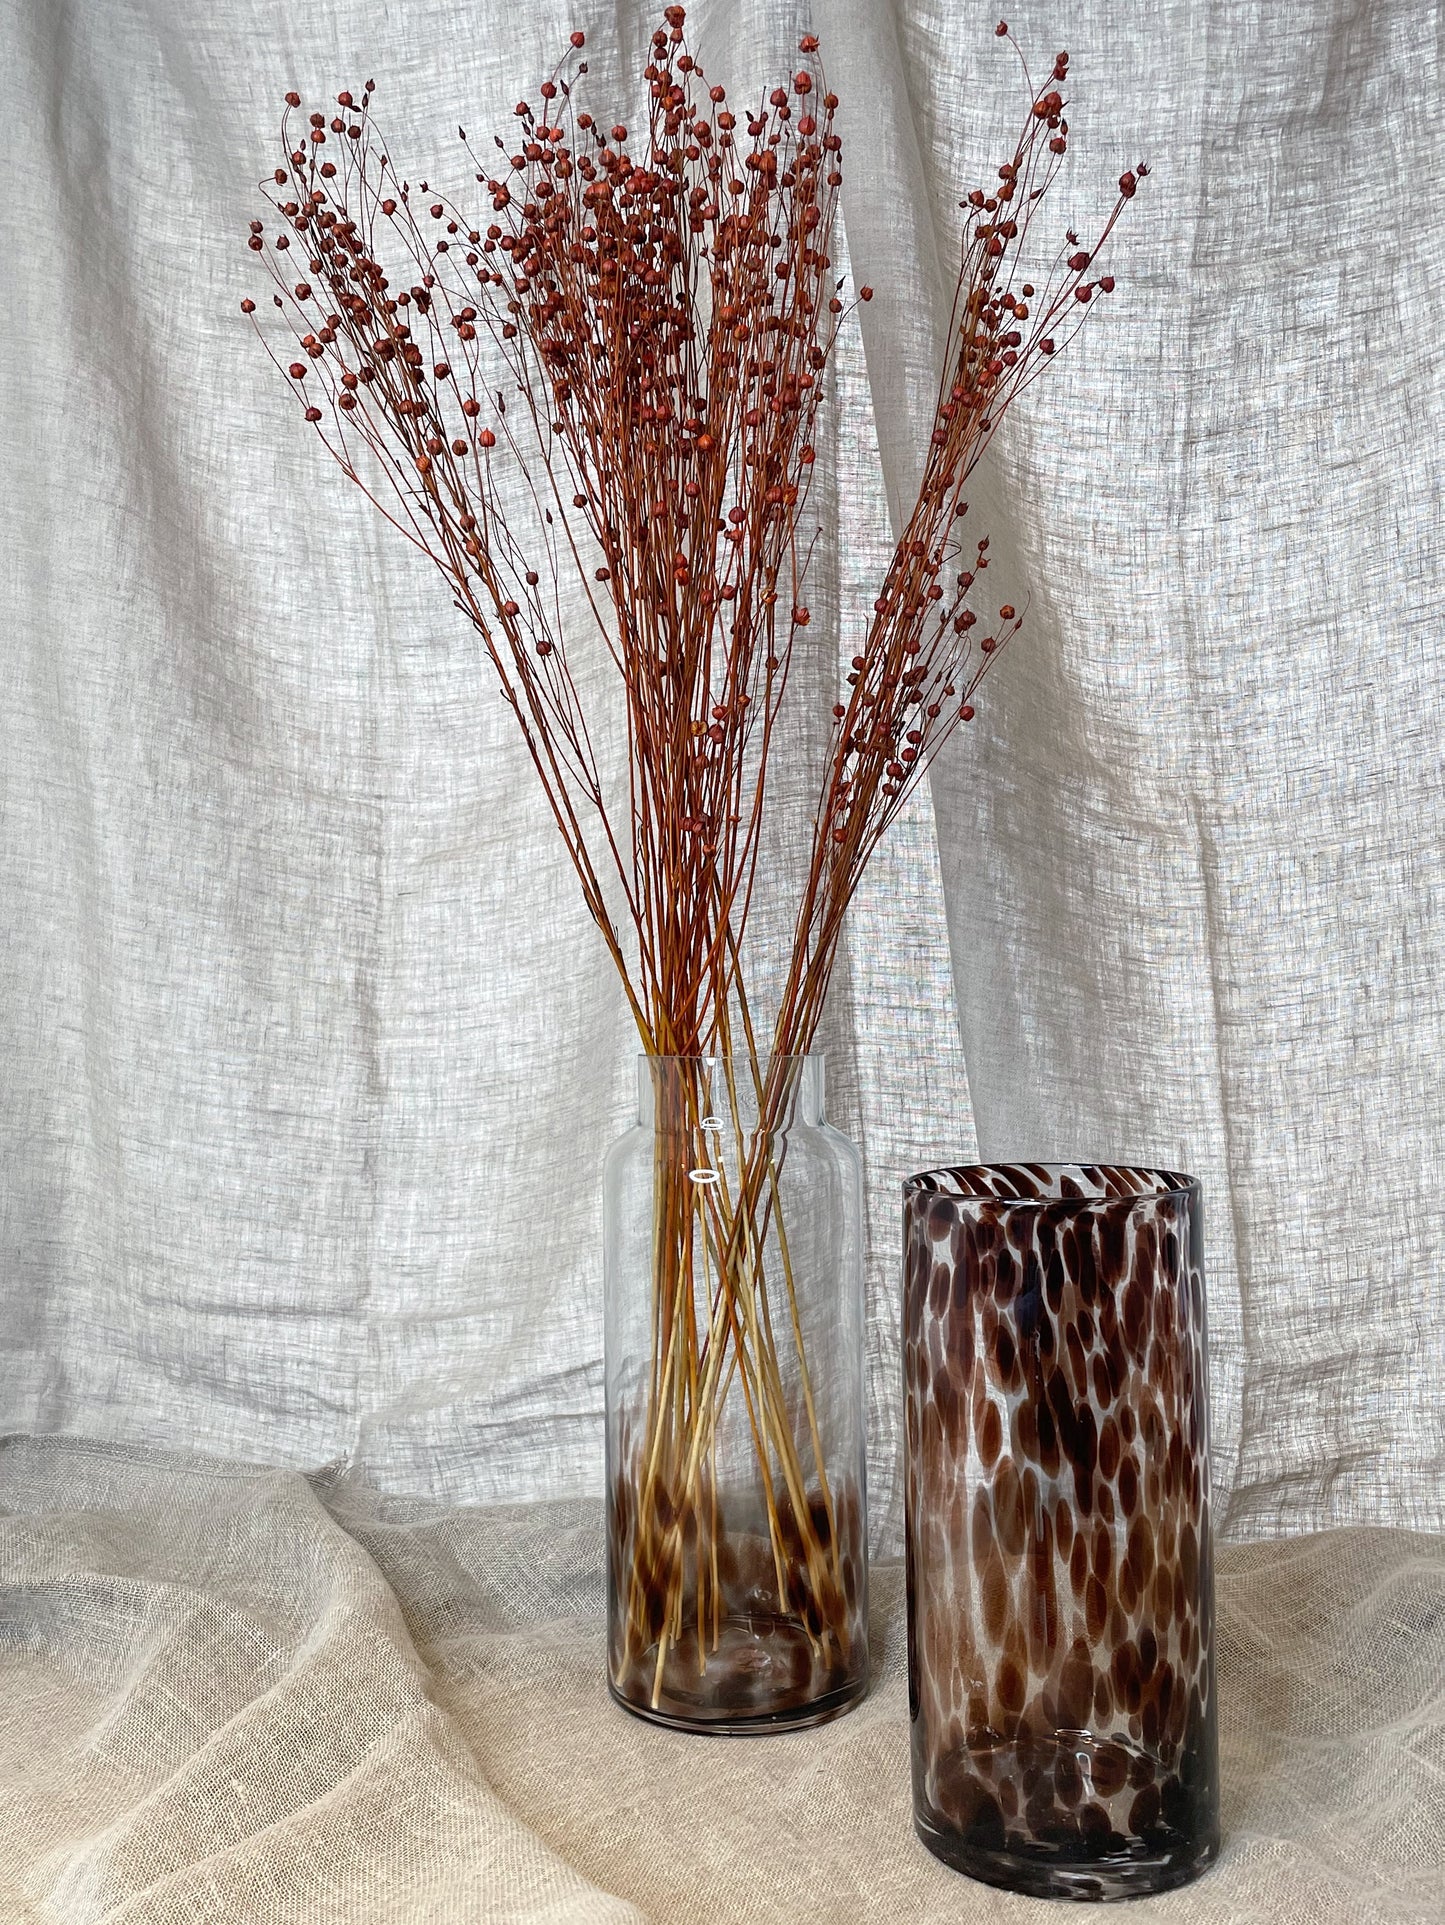 Two vases, one leopard print and one half leopard print, against a natural linen backdrop, the half print vase is filled with dark red dried flower stems